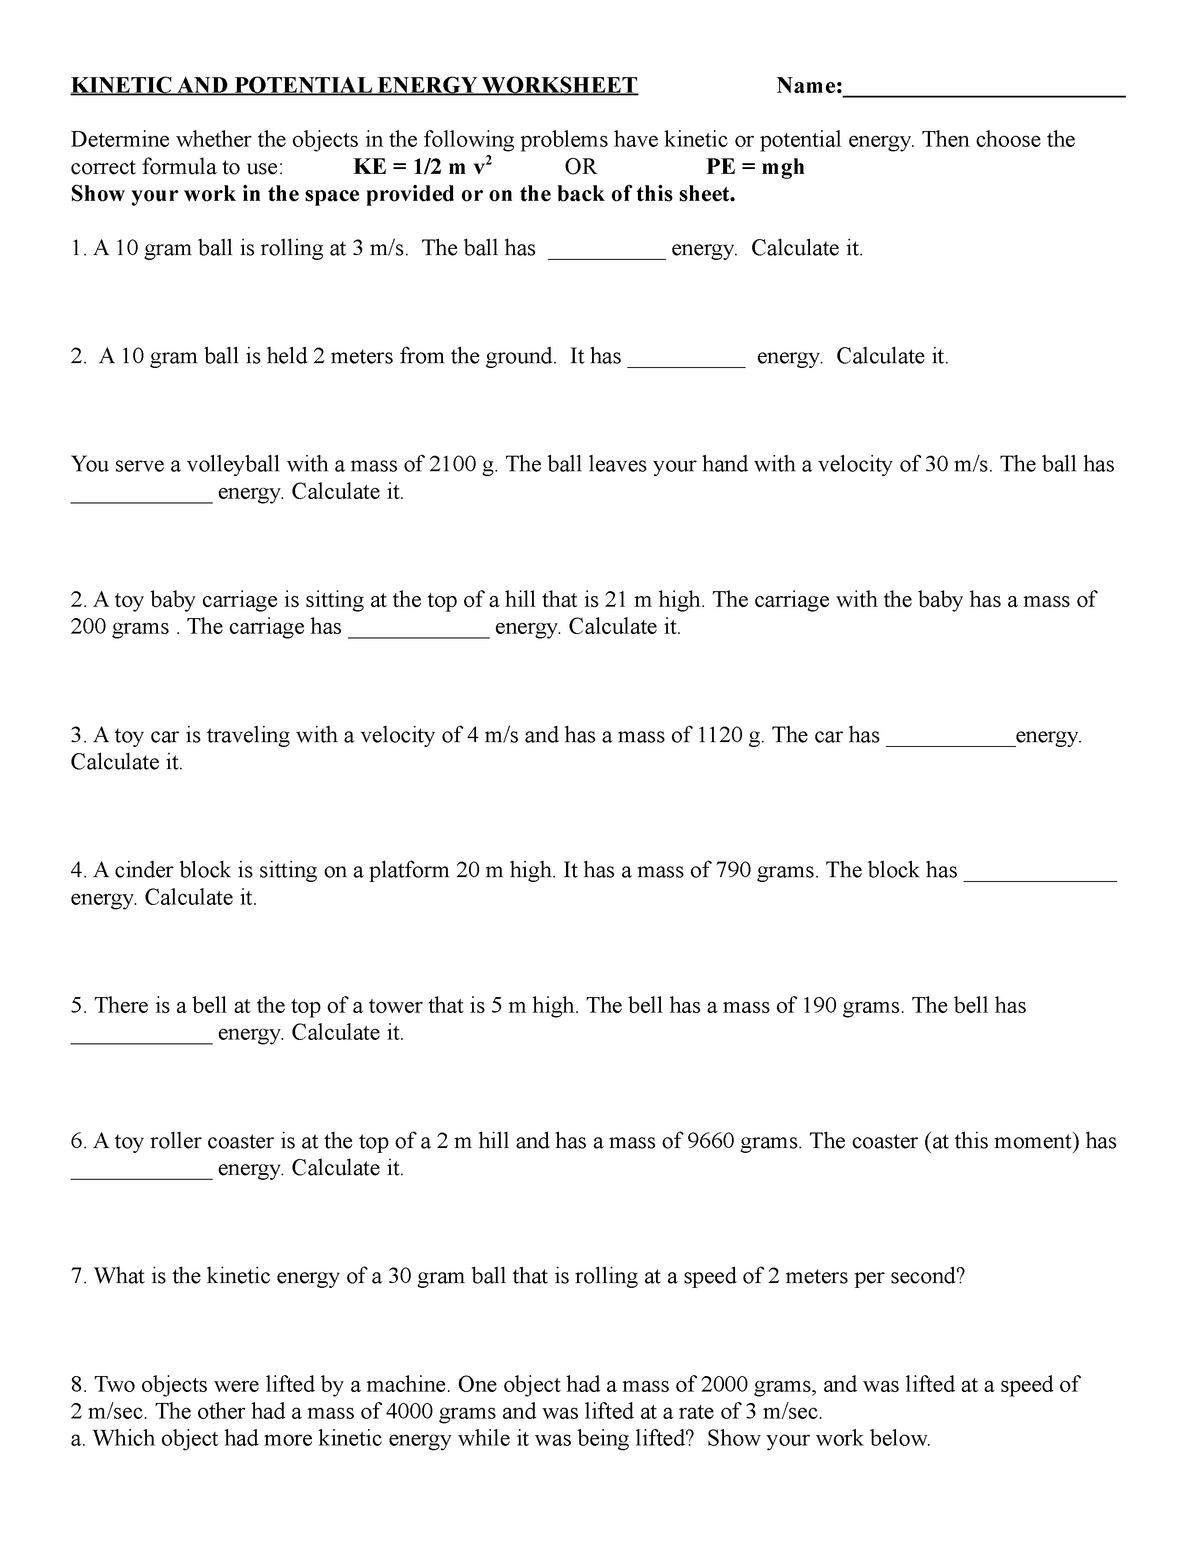 Calculating kinetic and potential energy - KINETIC AND POTENTIAL In Introduction To Energy Worksheet